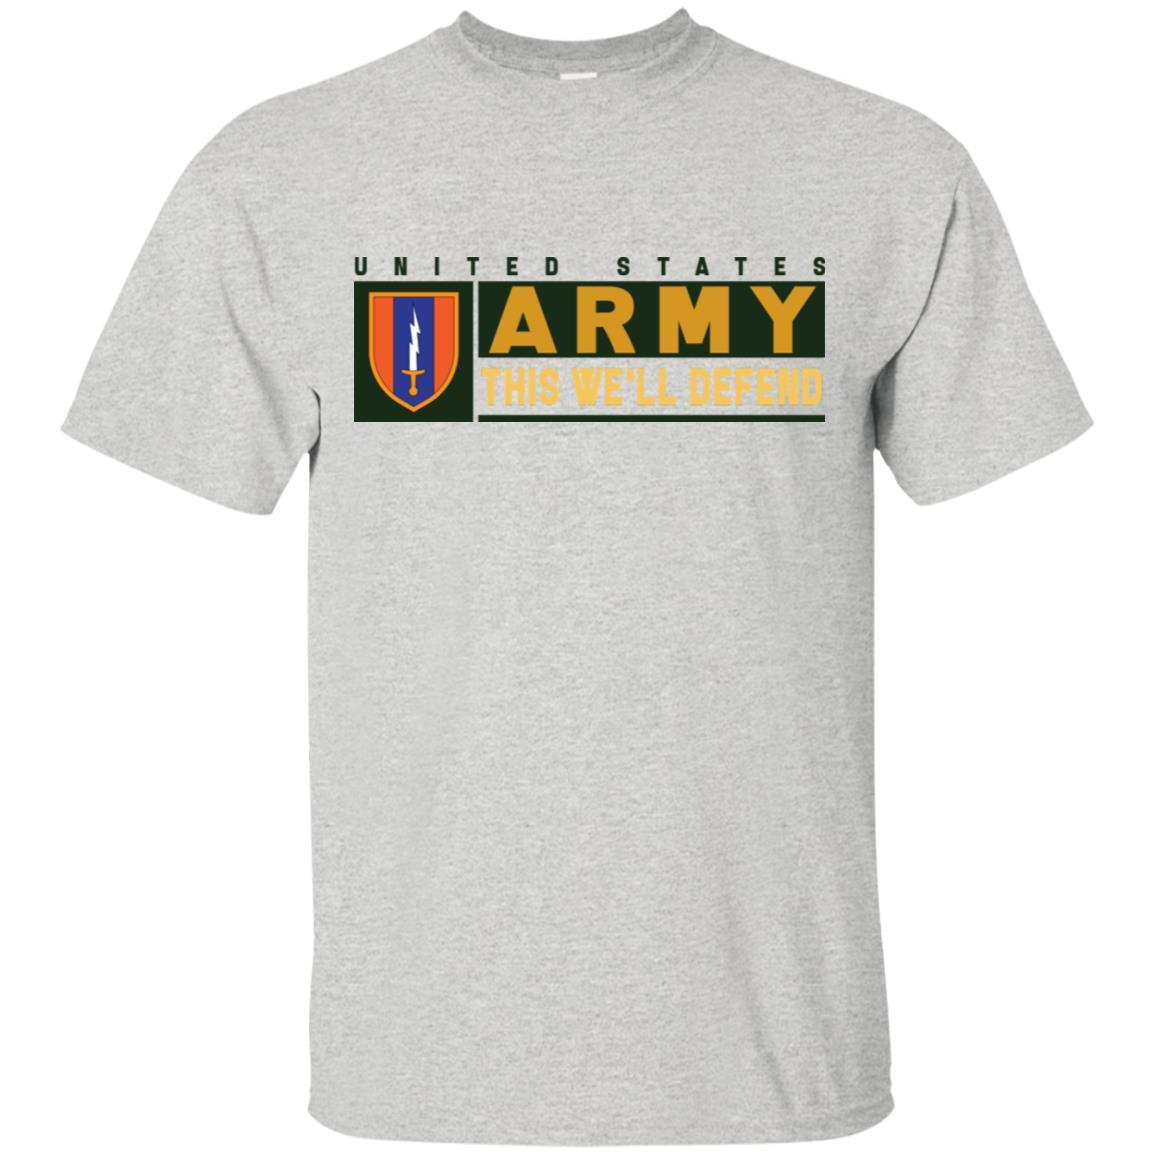 US Army 1ST SIGNAL- This We'll Defend T-Shirt On Front For Men-TShirt-Army-Veterans Nation